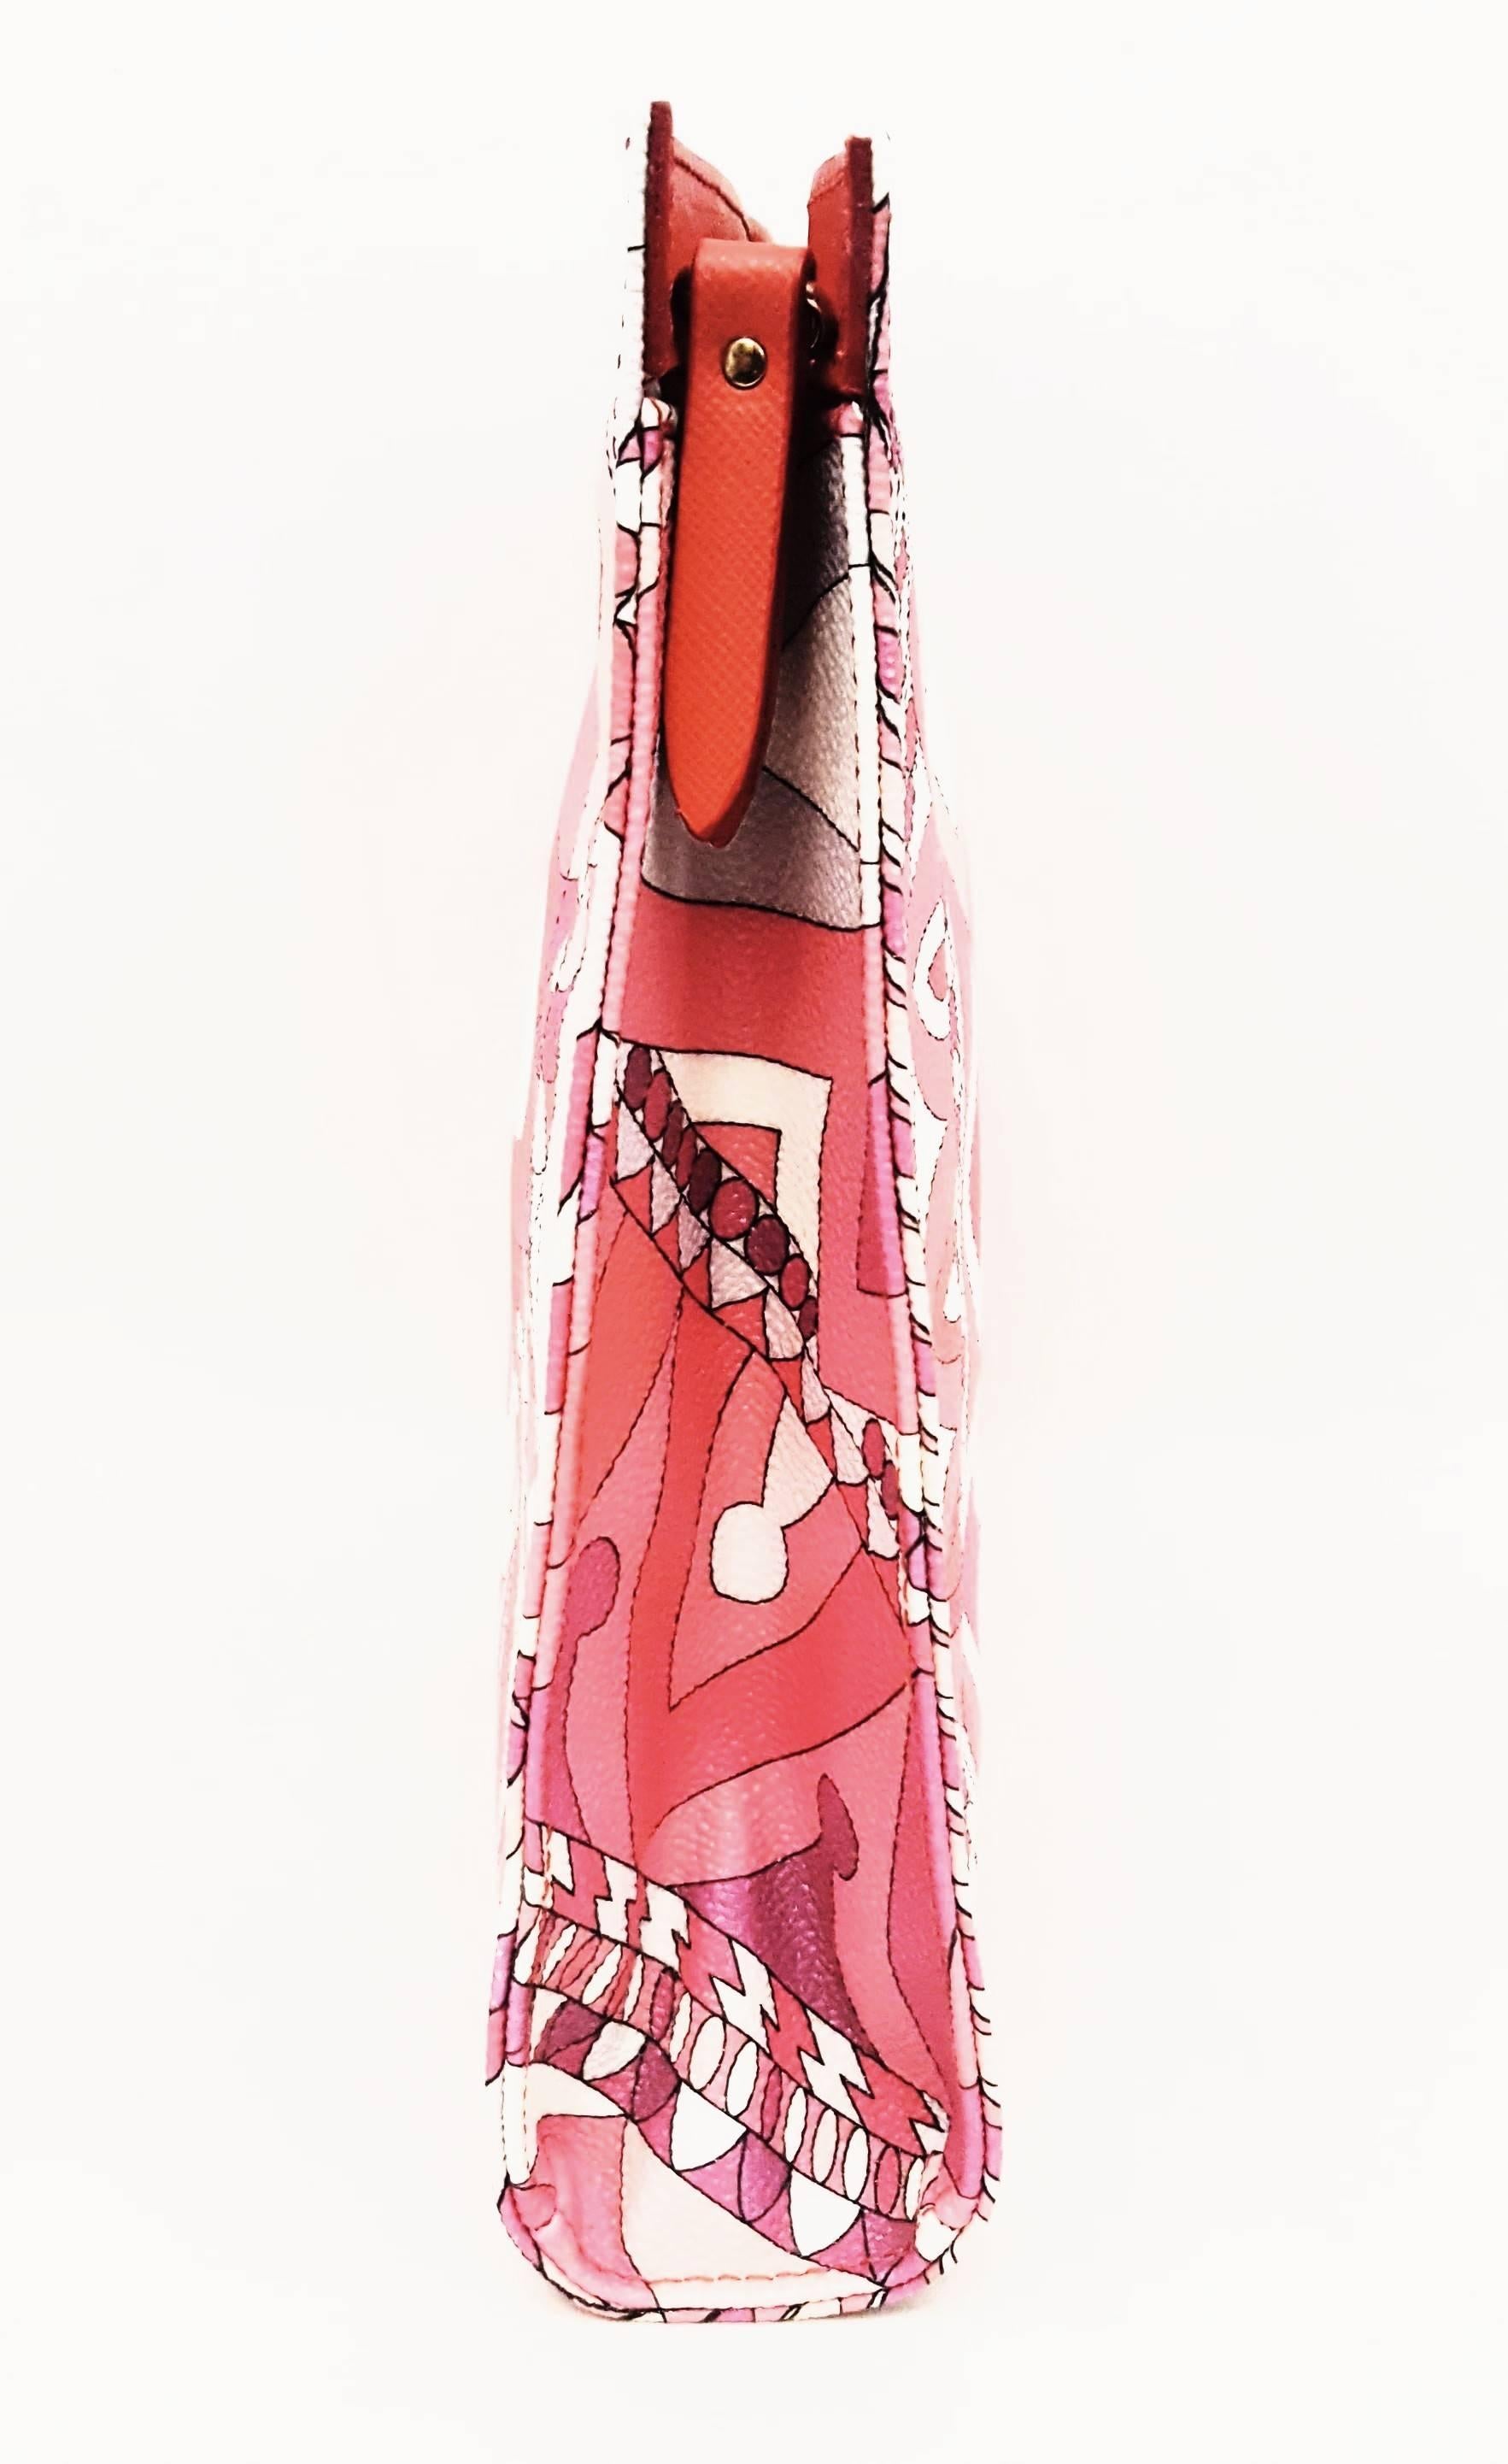 Emilio Pucci pale and bright pink calf leather geo graphic print clutch bag featur a top zip closure.   The internal slip pocket is lined in ivory leather and contains a logo Emilio Pucci Made in Italy patch.  On the exterior a leather and gold tone